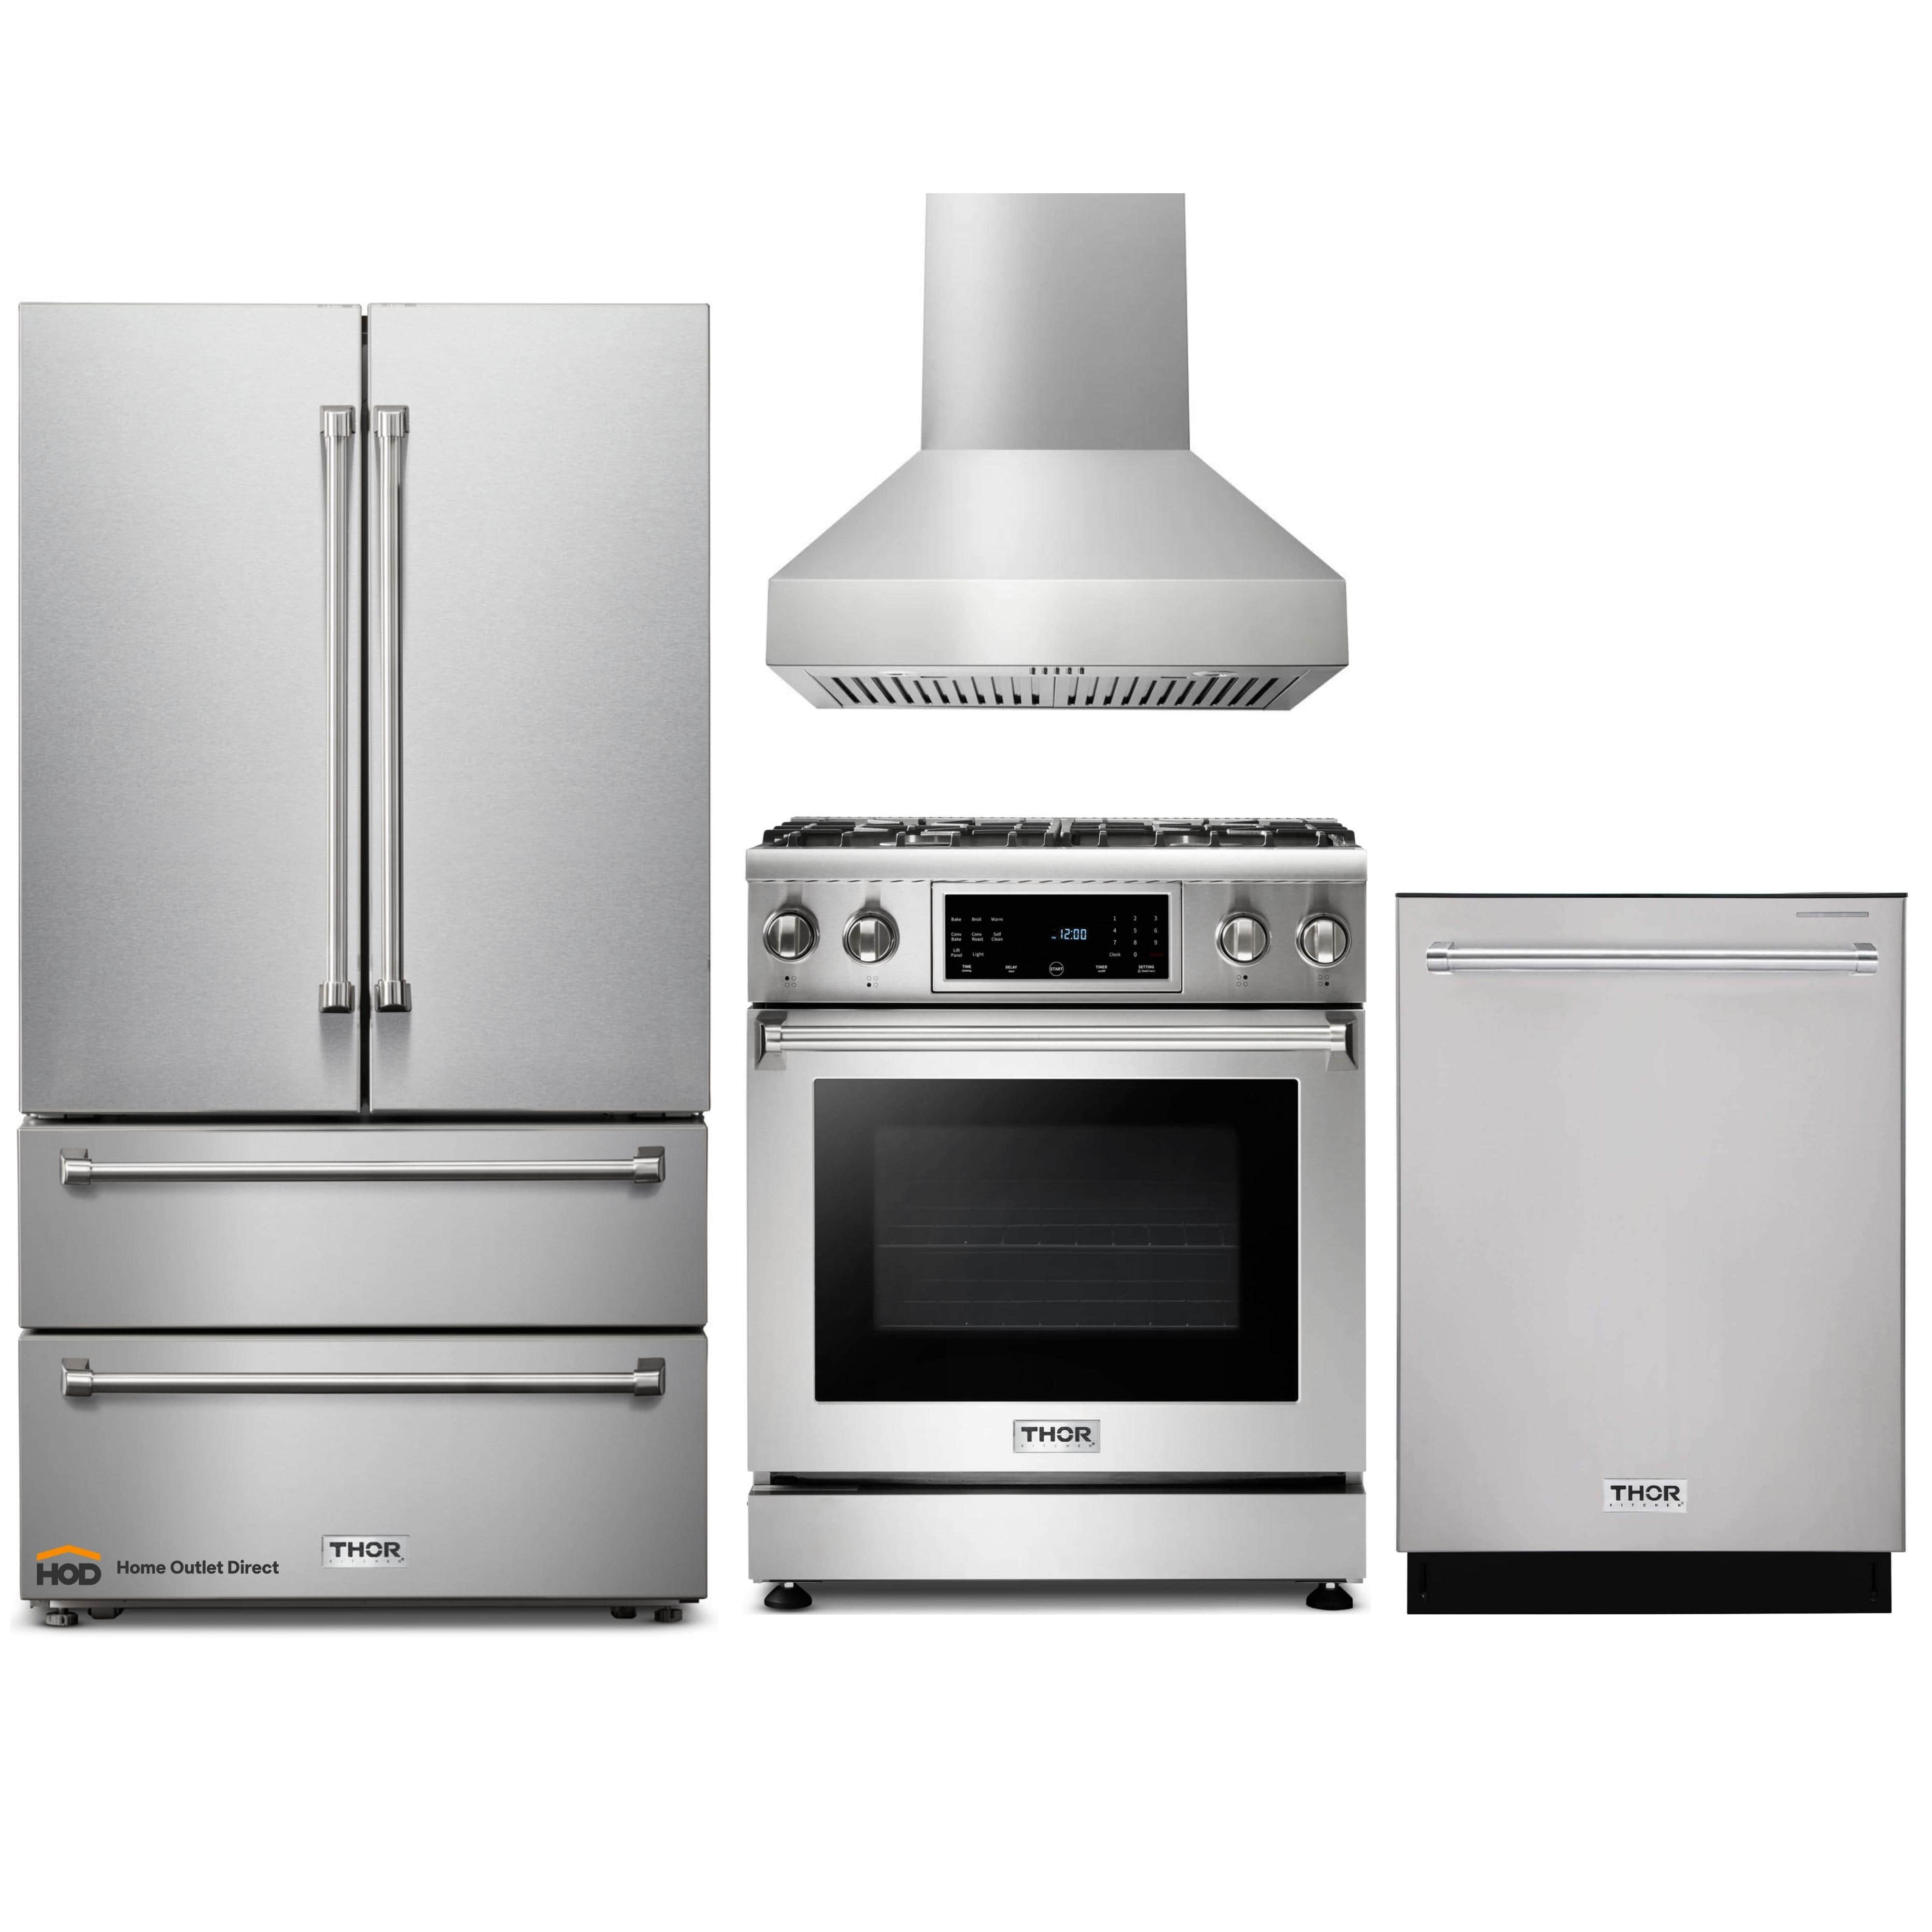 Thor Kitchen 4-Piece Appliance Package - 30-Inch Gas Range with Tilt Panel, French Door Refrigerator, Pro-Style Wall Mount Hood, and Dishwasher in Stainless Steel